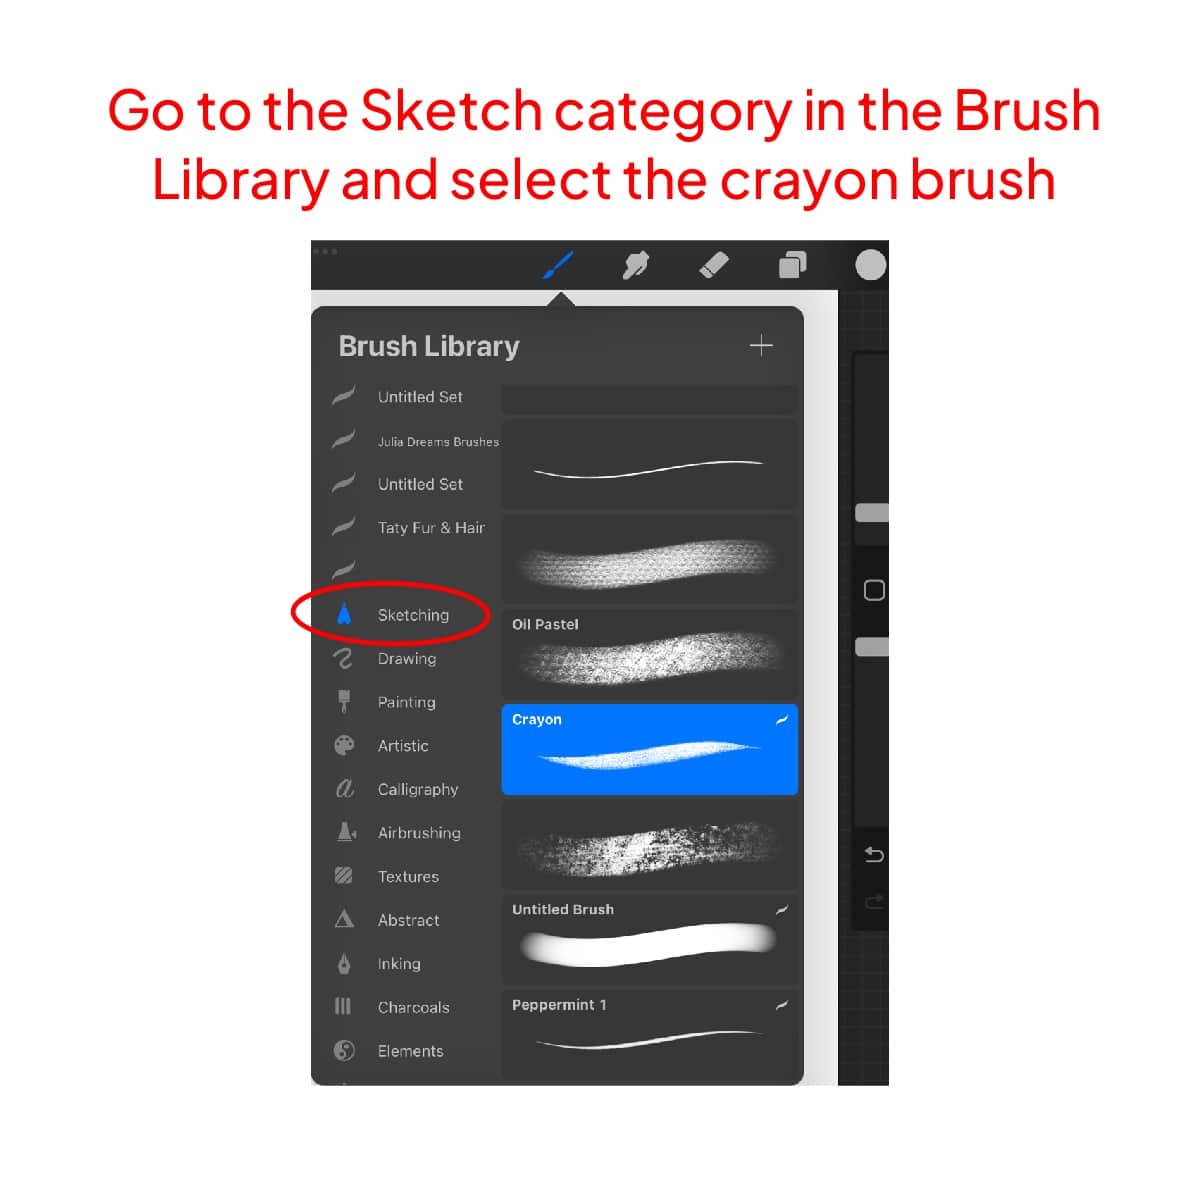 Crayon brush in sketch category